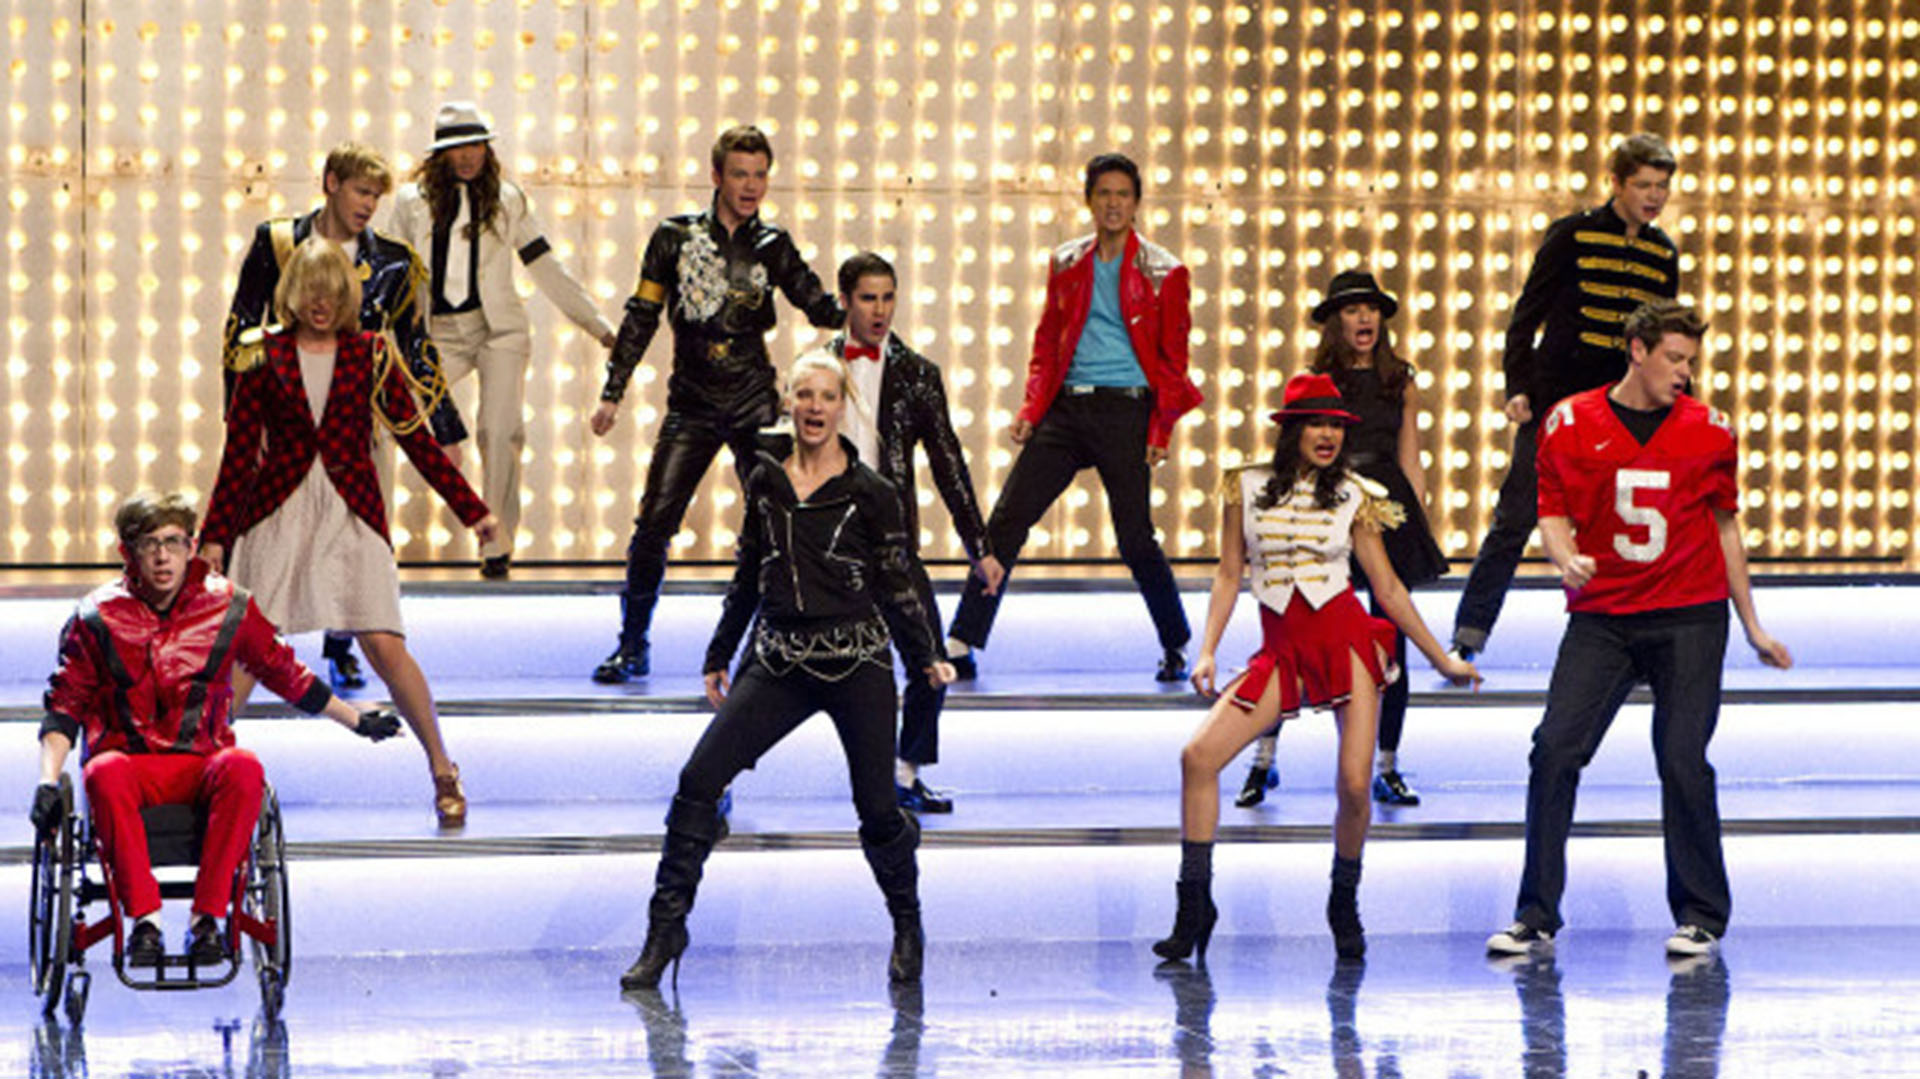 On the second step and in a red jacket, we see Harry Shum Jr. when he was part of "Glee".  (Justin Lubin/FOX)